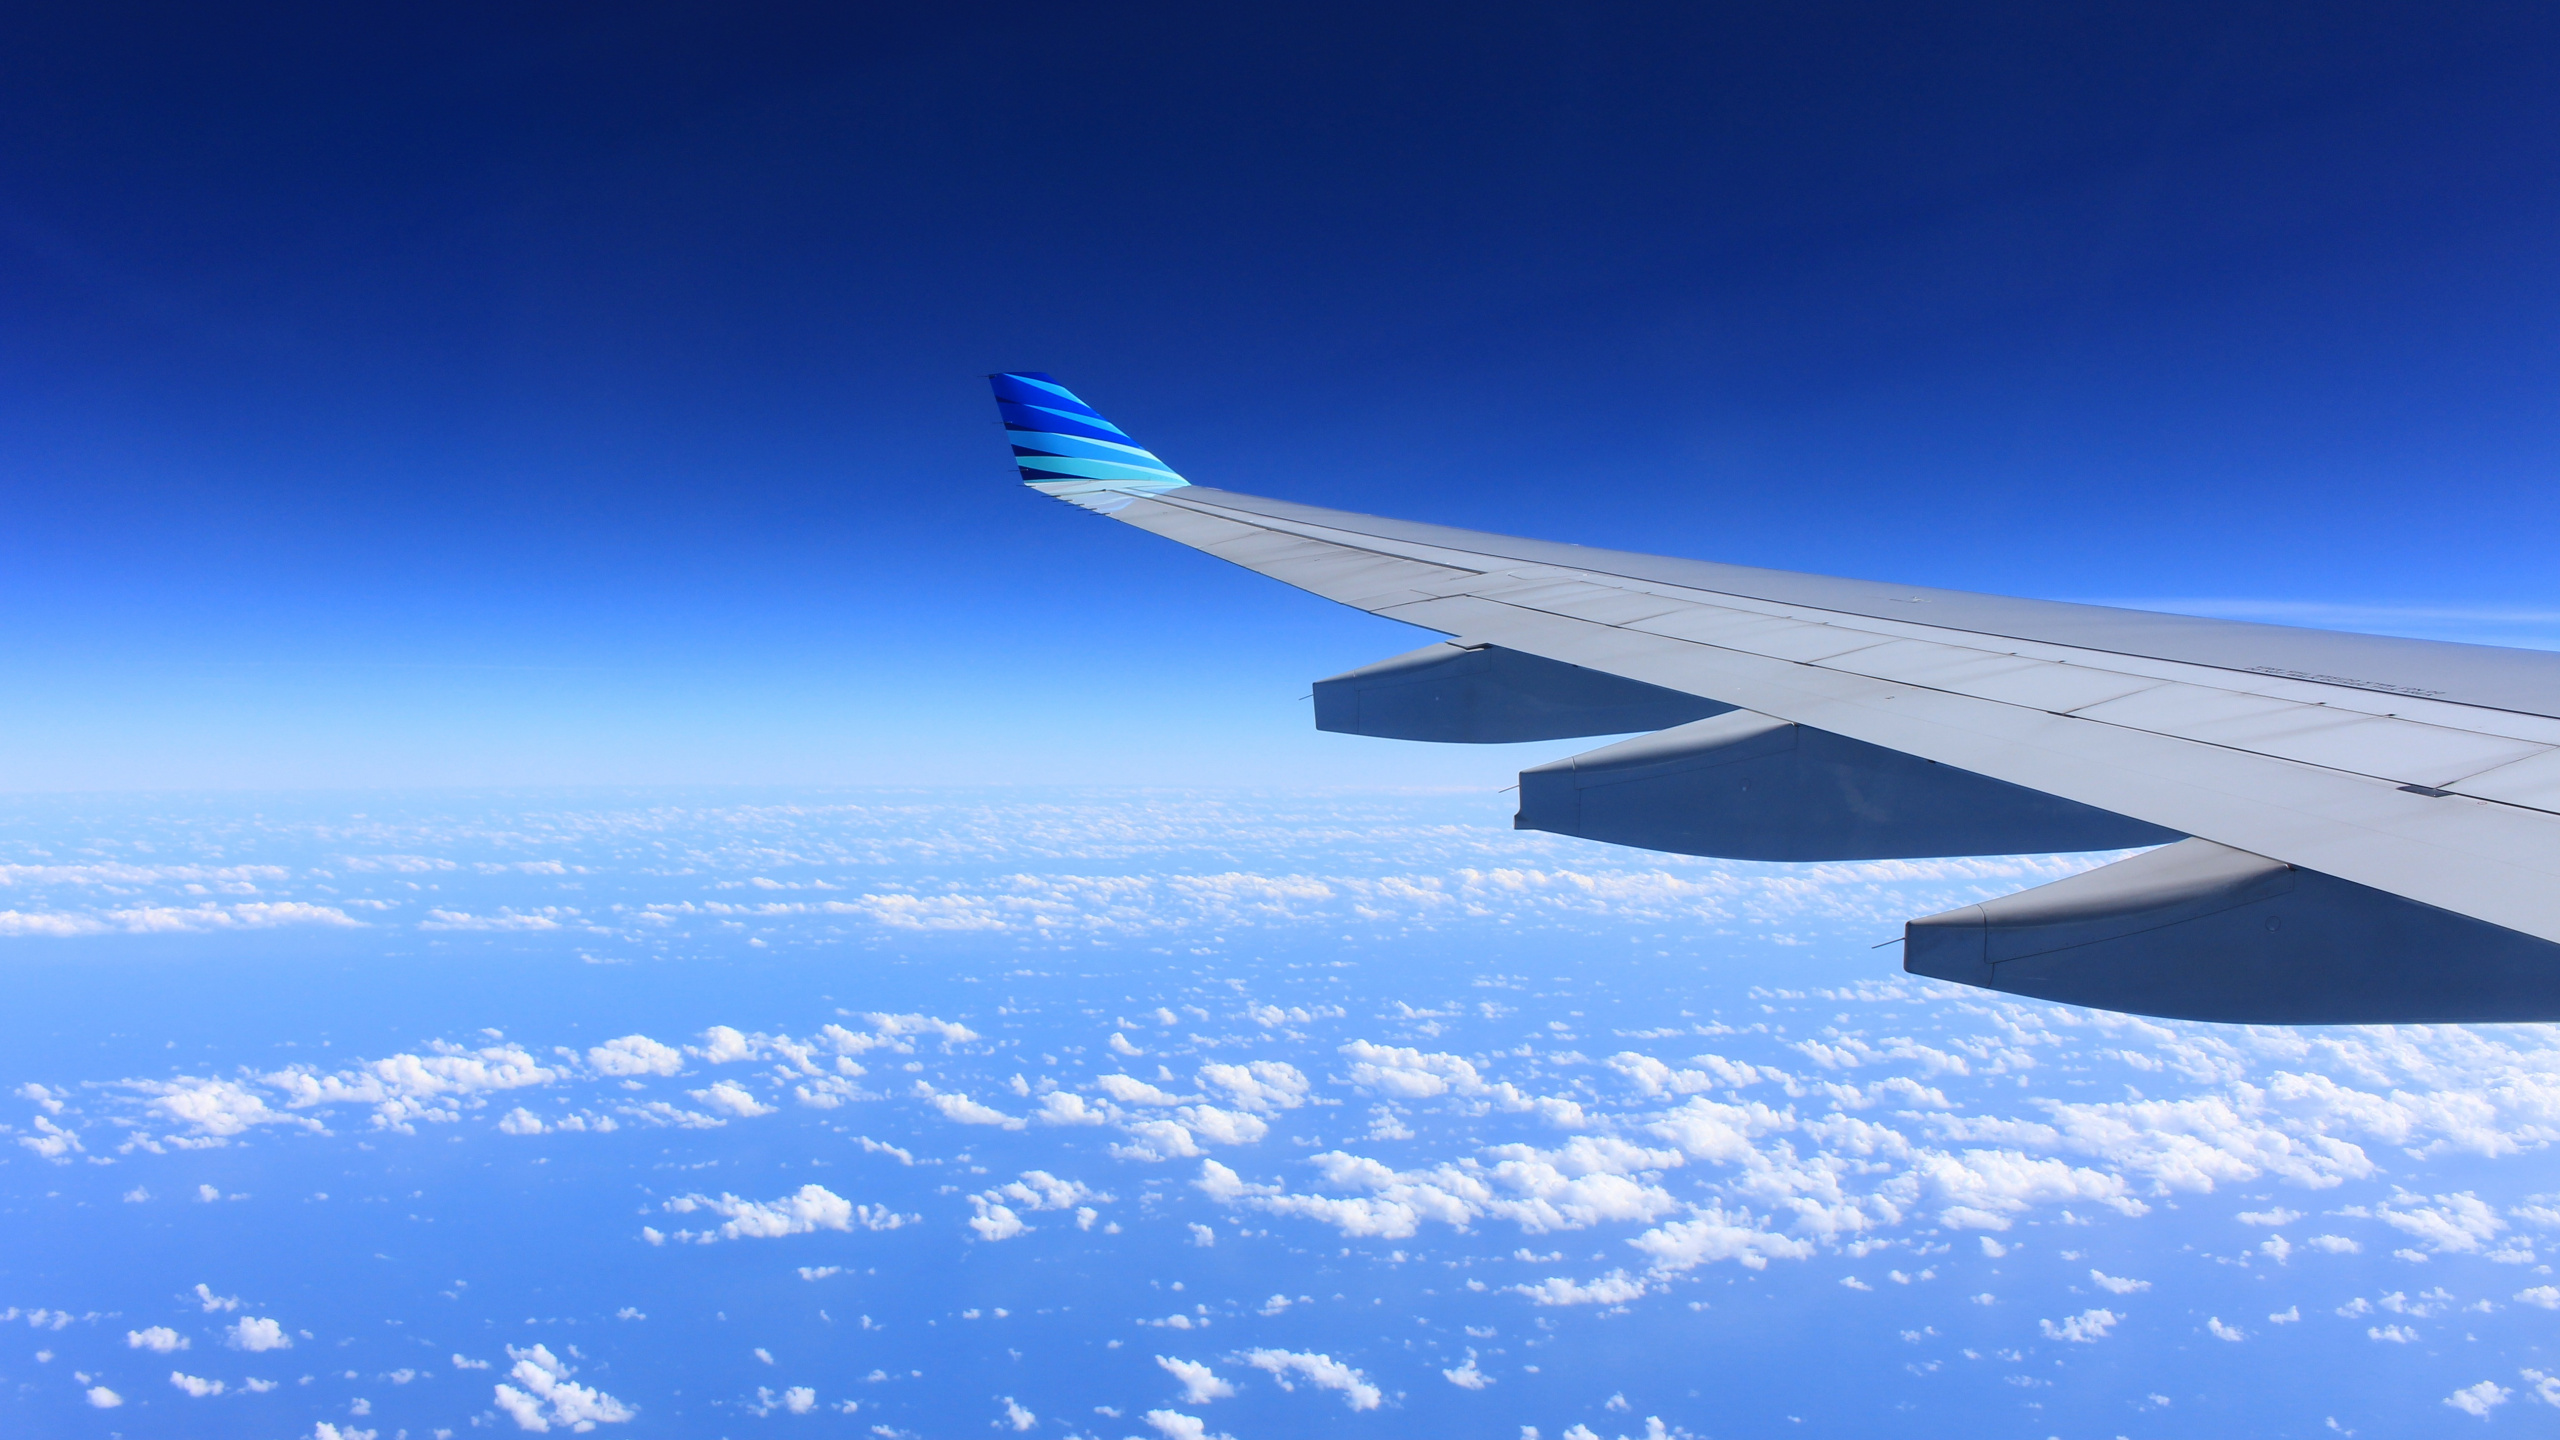 White and Blue Airplane Wing Under Blue Sky During Daytime. Wallpaper in 2560x1440 Resolution